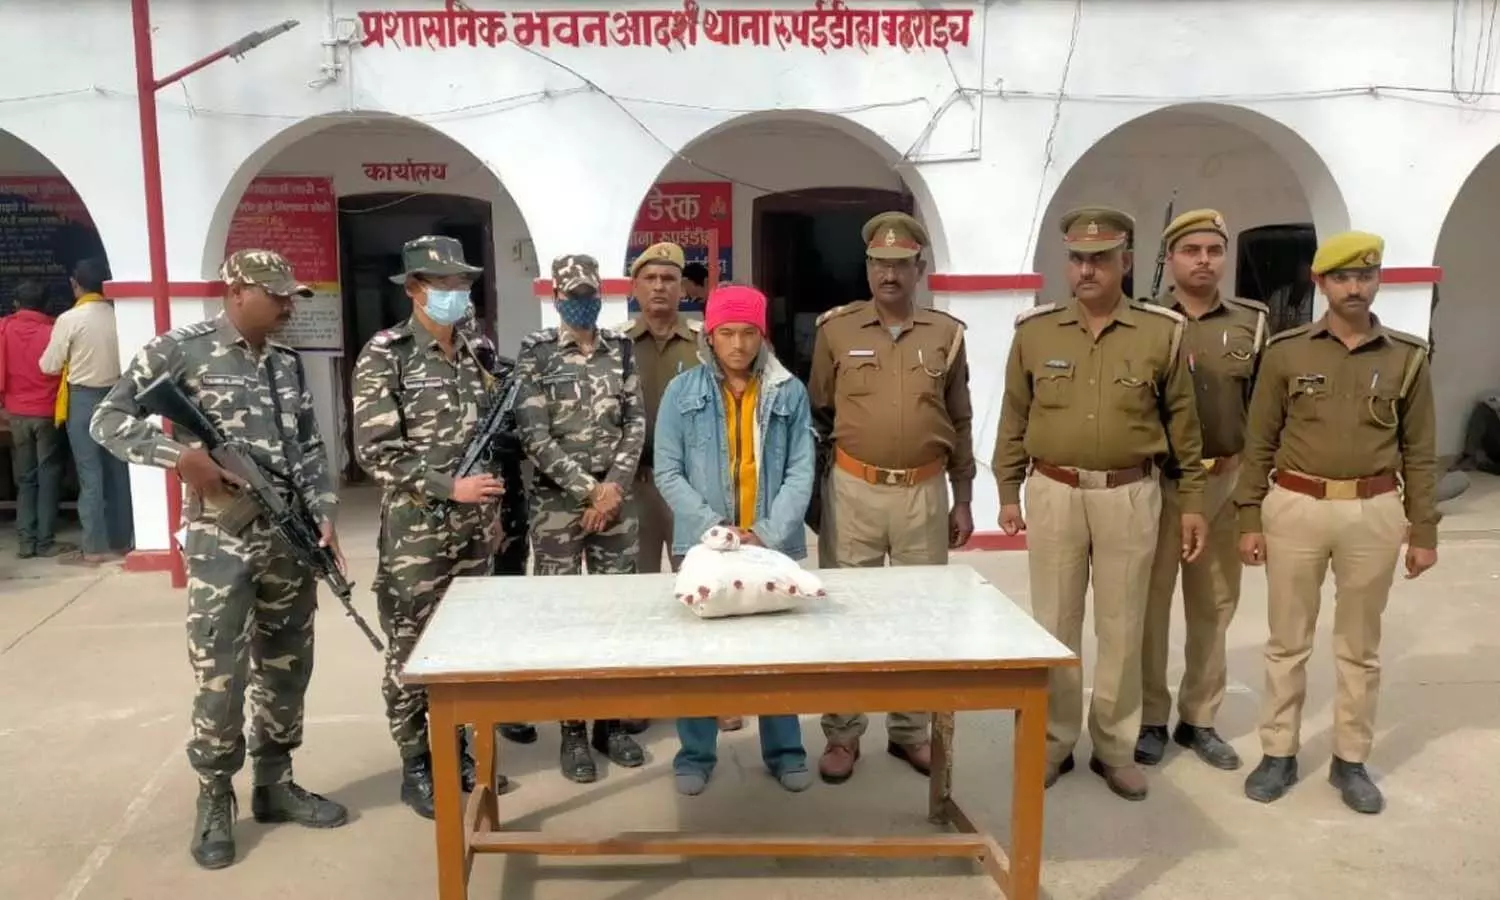 Bahraich Crime News: Nepalese arrested on border with charas worth two crores, sent to jail